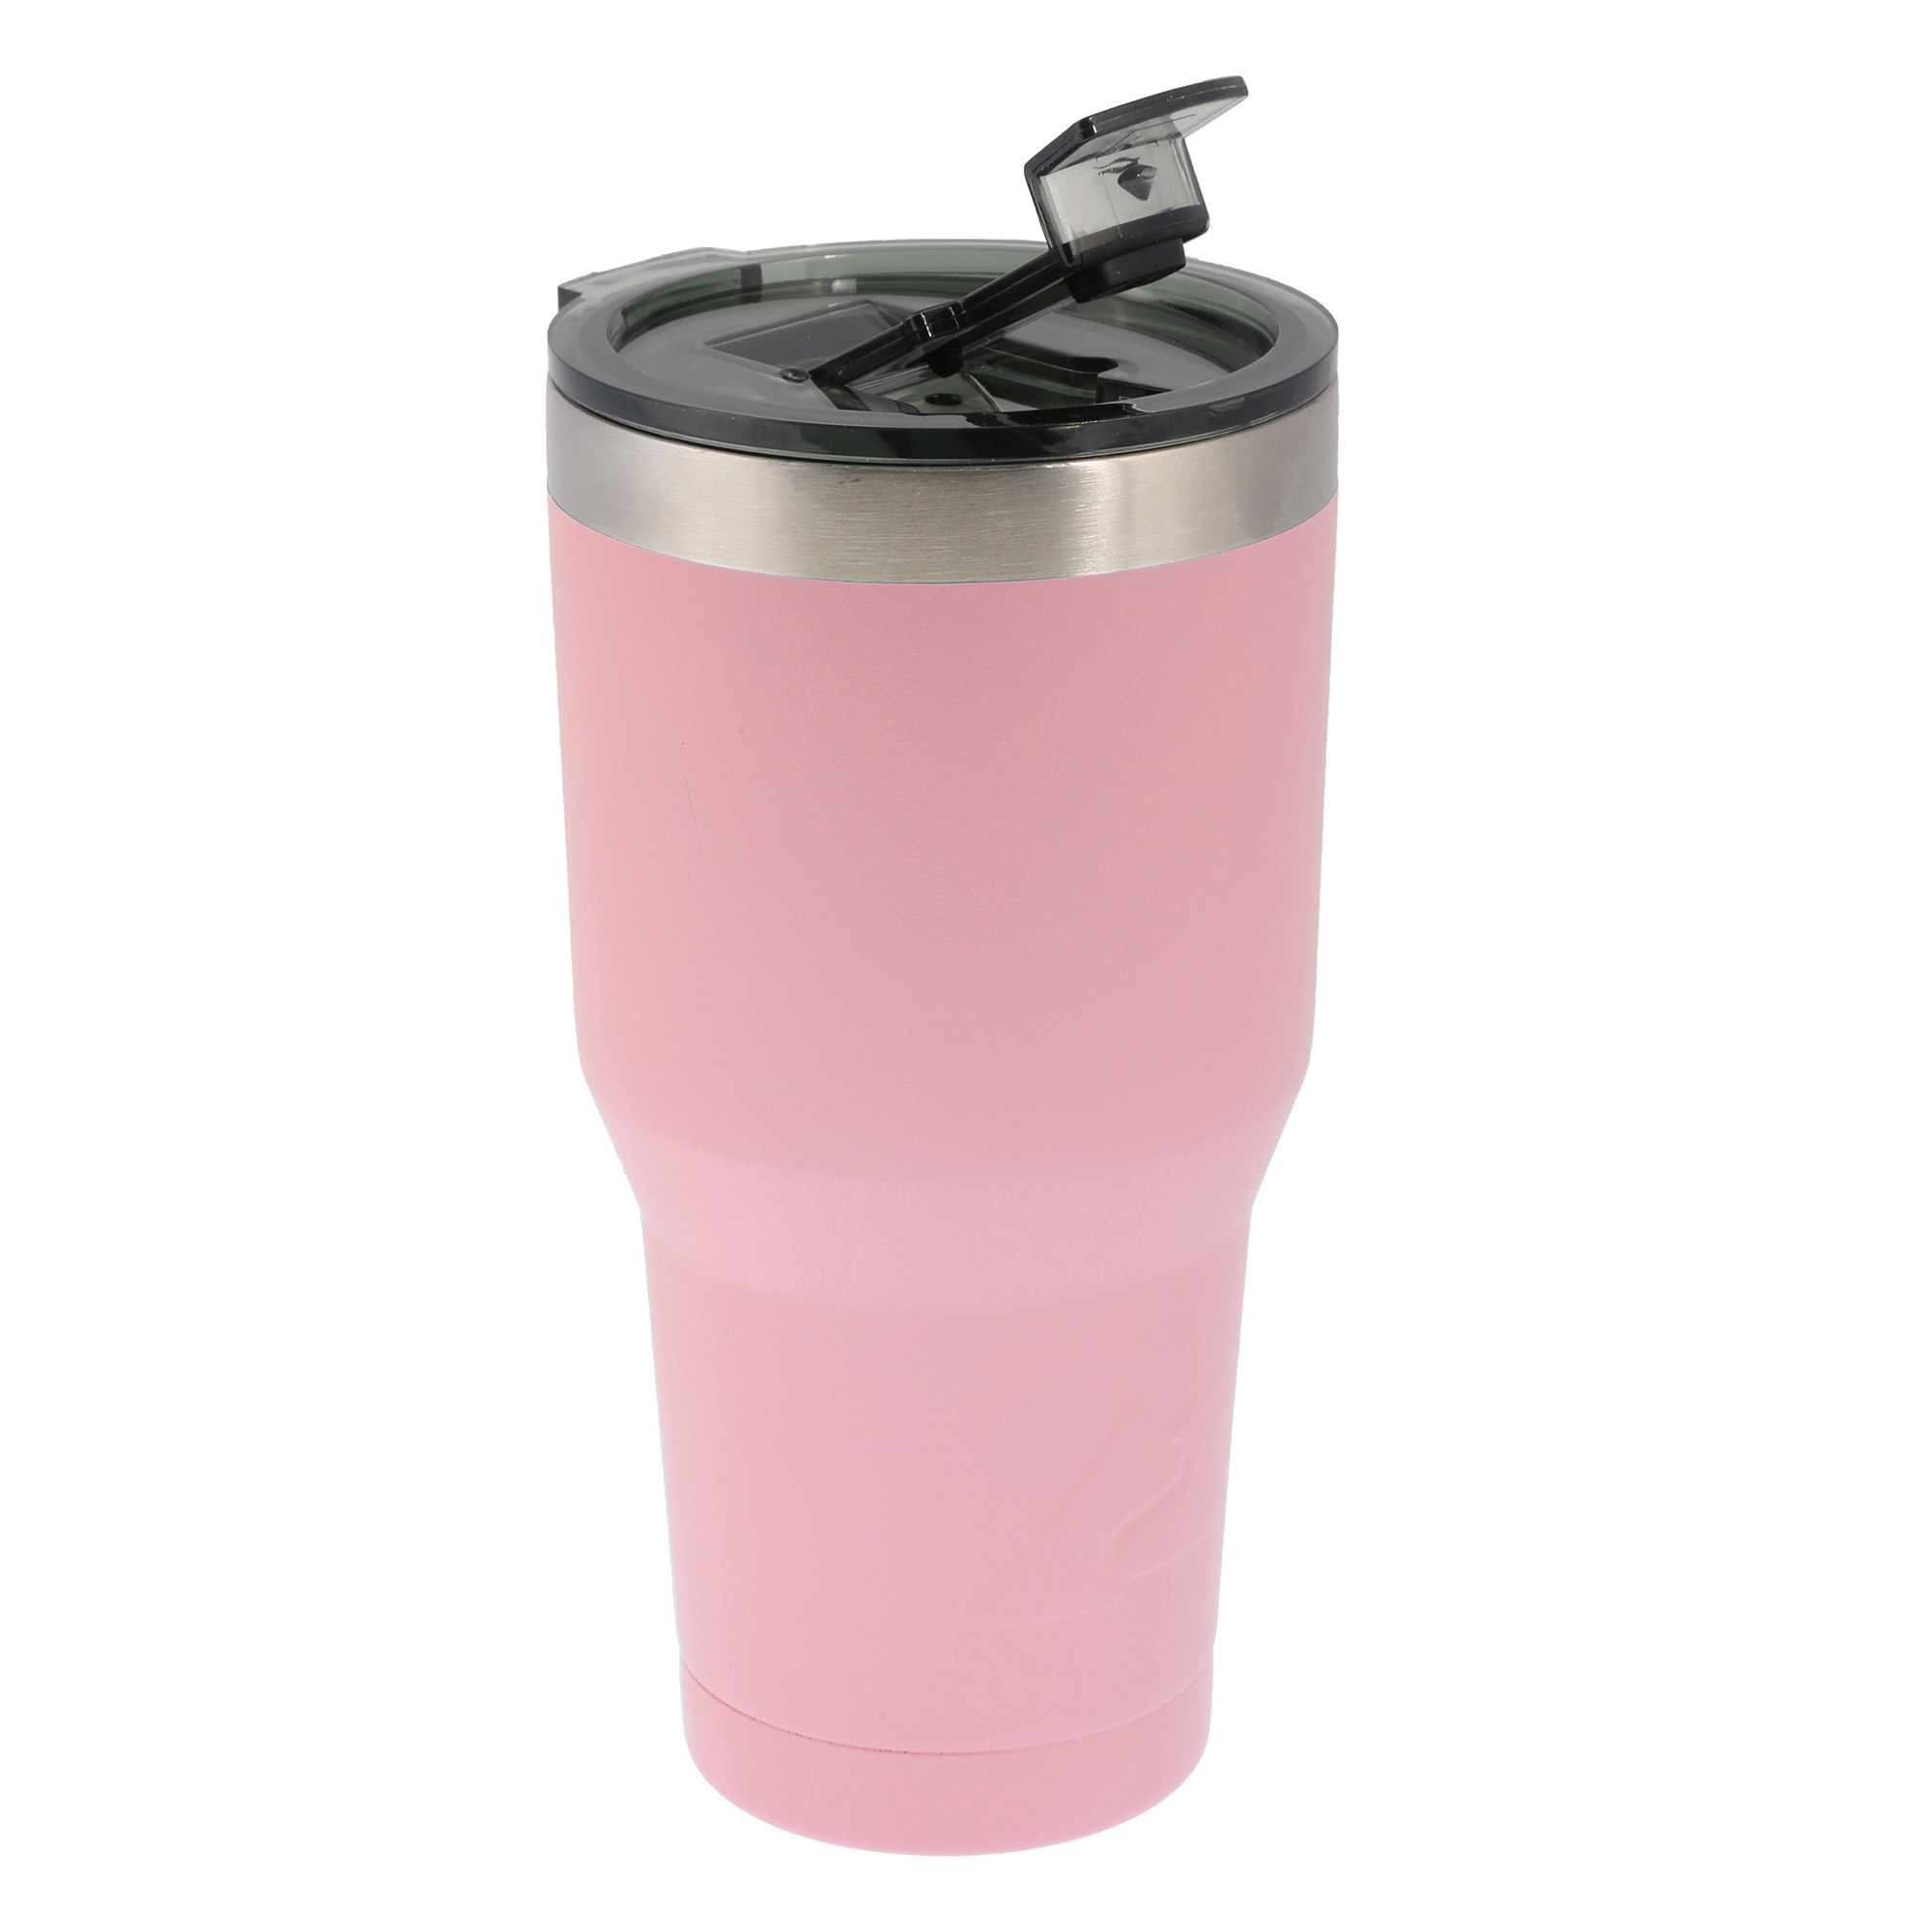 The tumbler, in pink